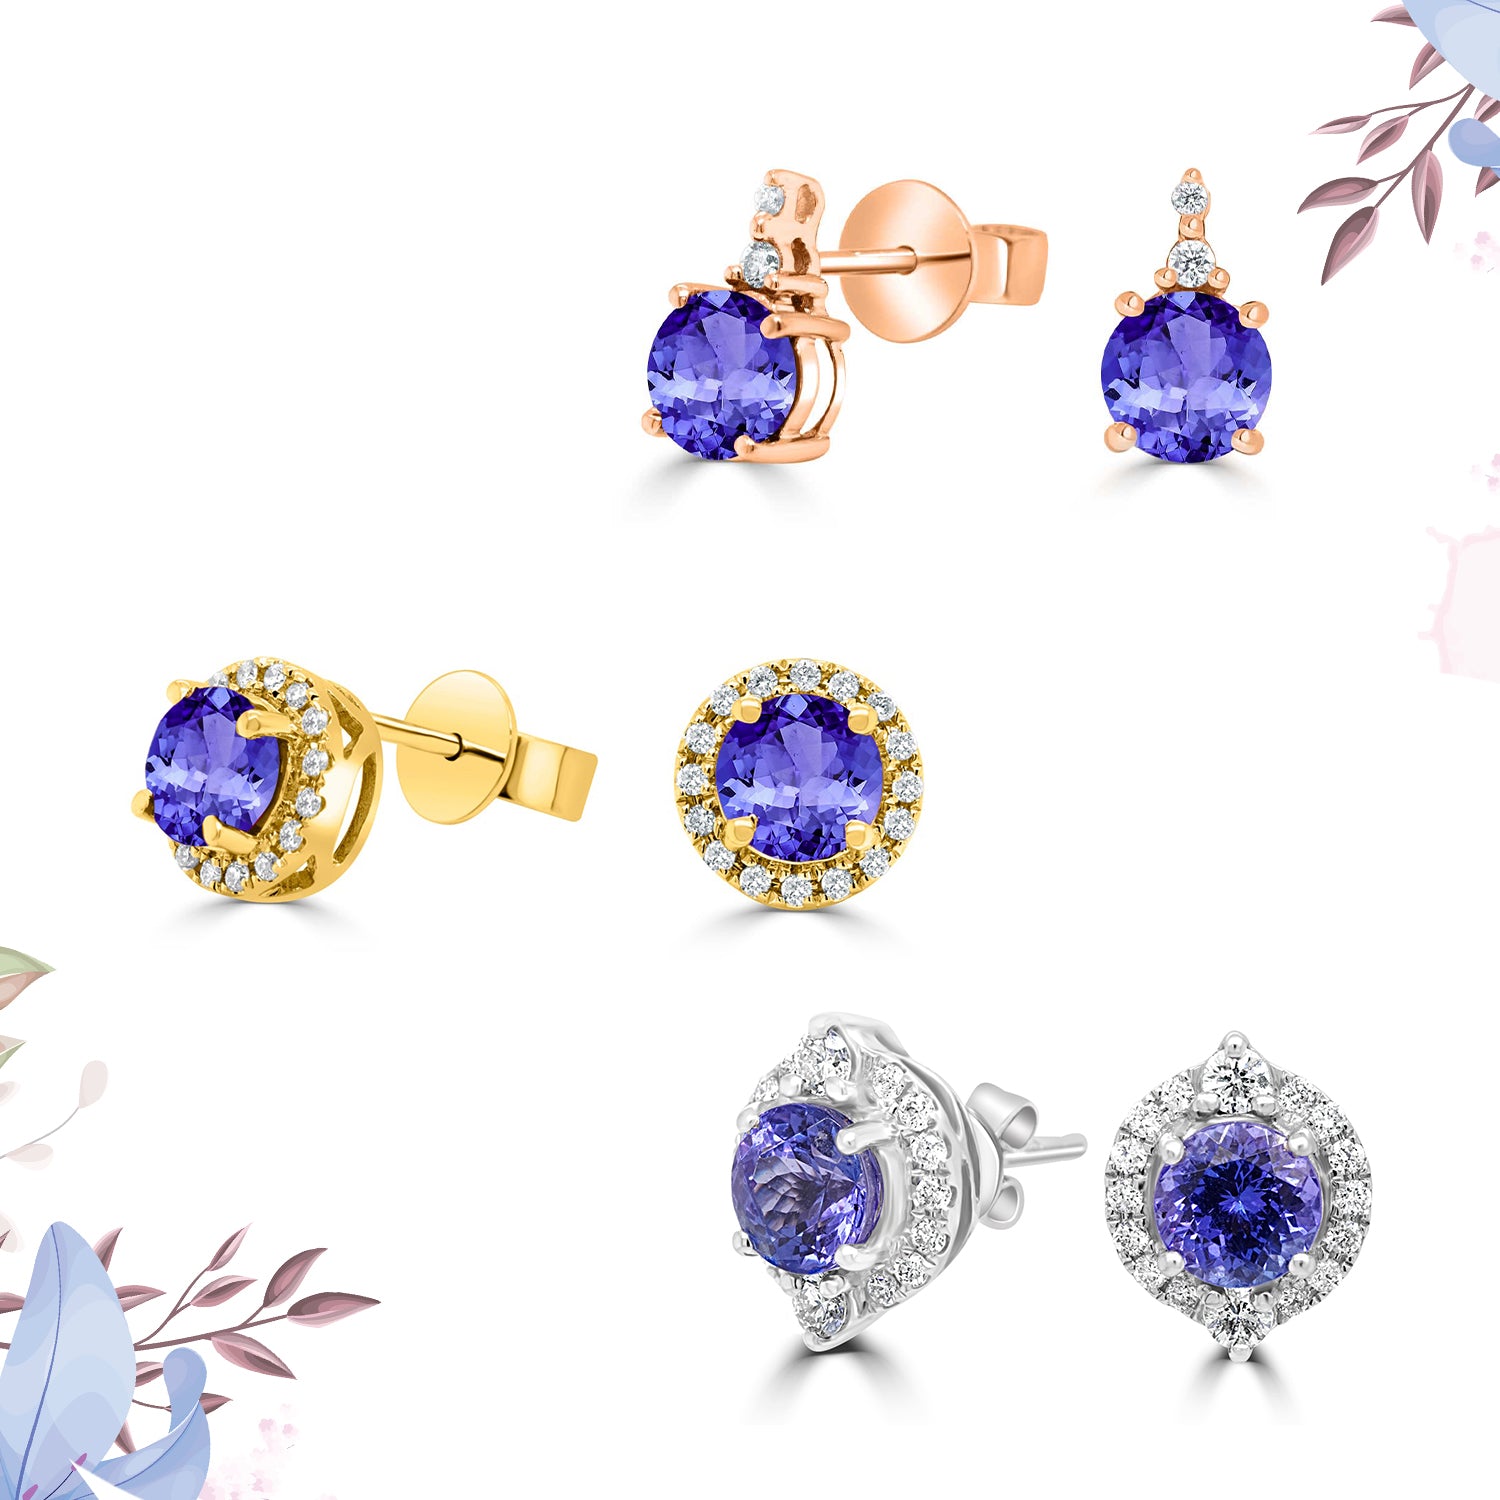 Upgrade your wardrobe with these round tanzanite earrings